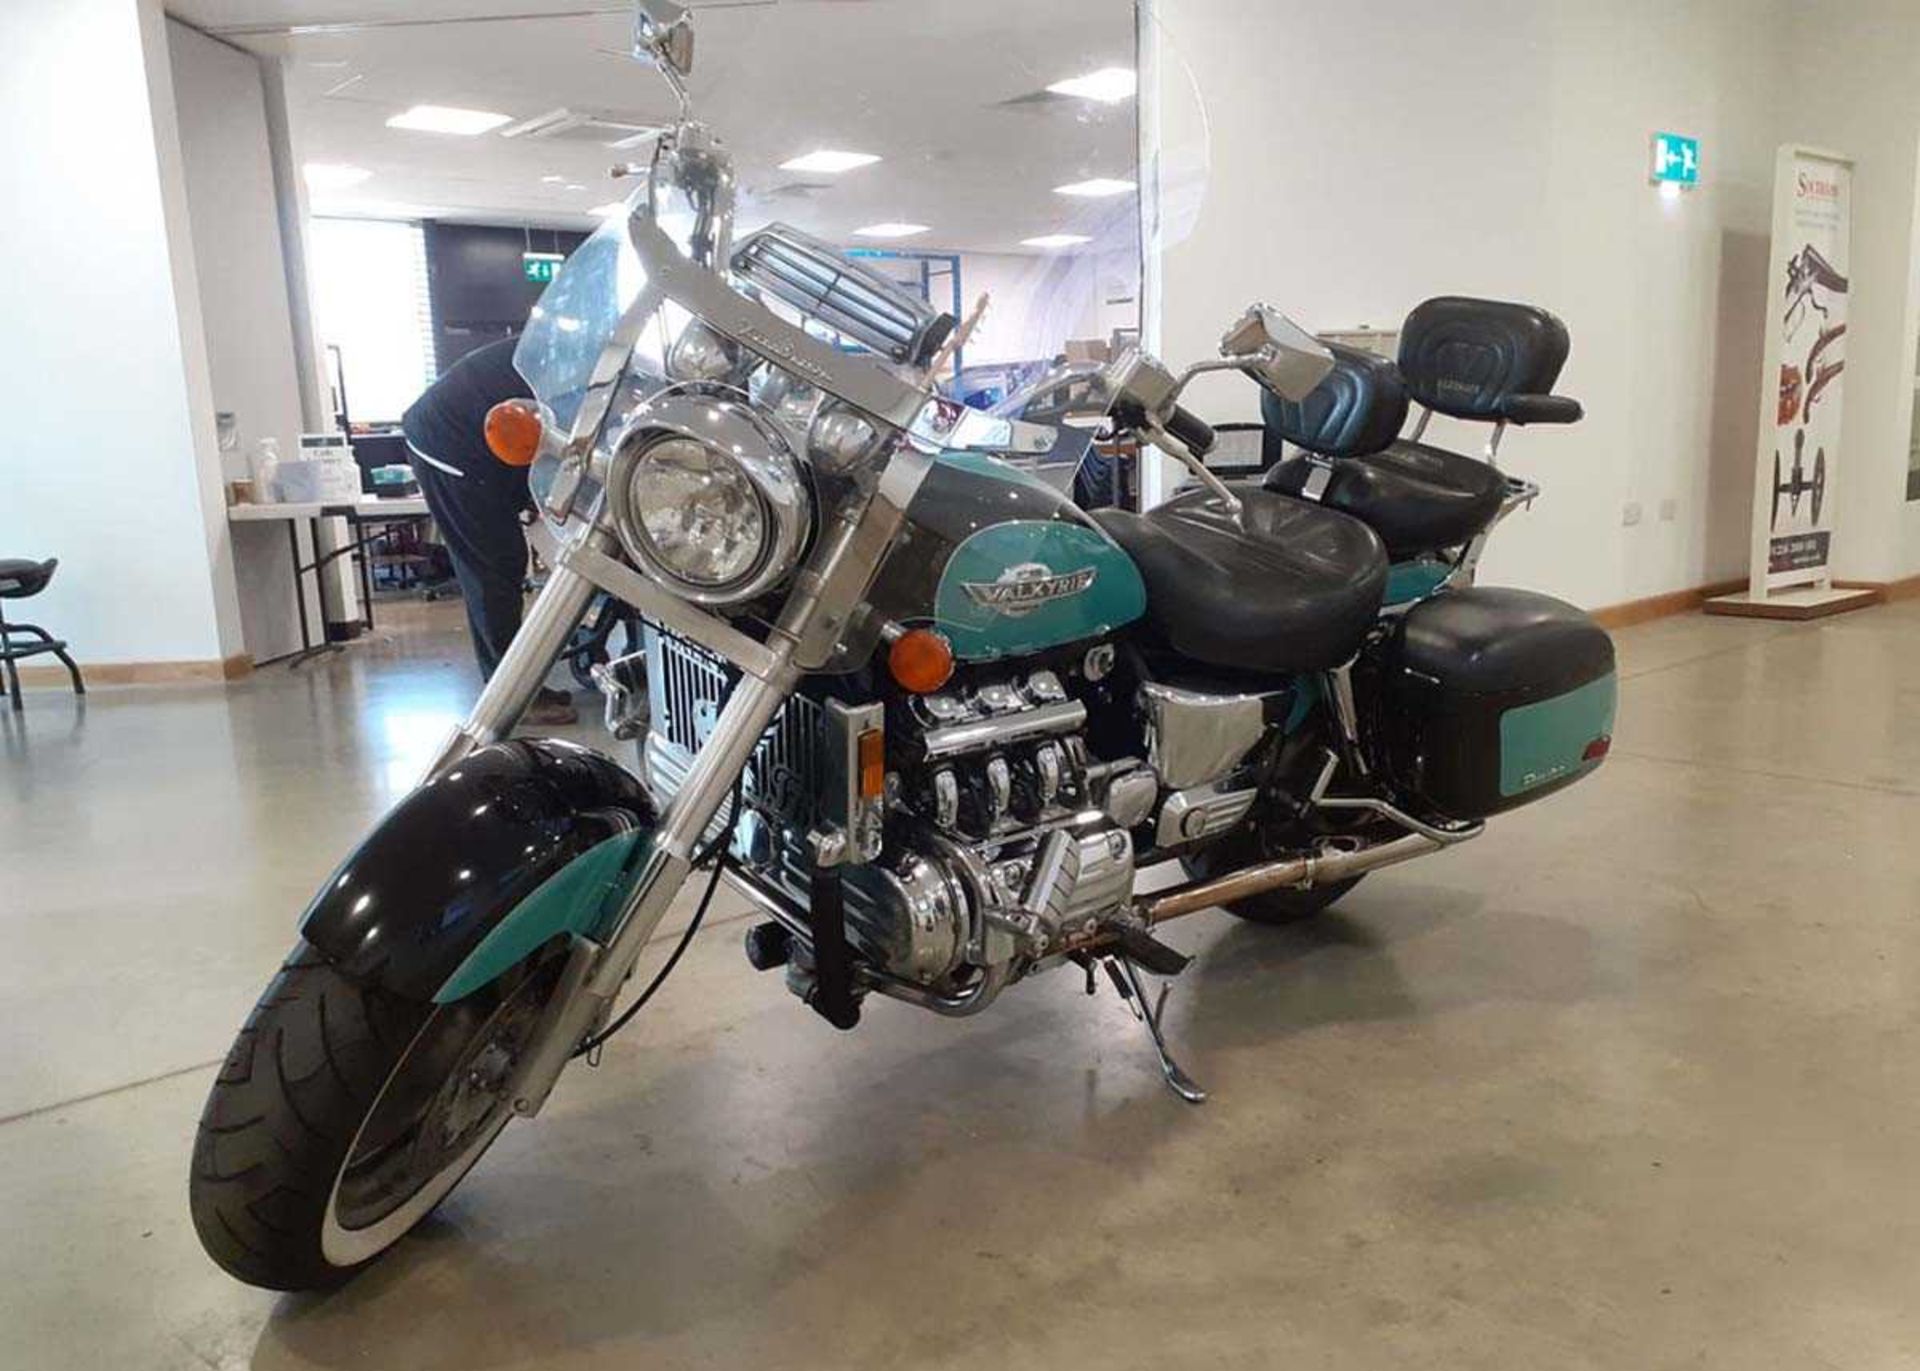 (1998) Honda Valkyrie F6 Tourer Motorbike in turquoise and black, first registered in UK 01/08/21, - Image 2 of 11